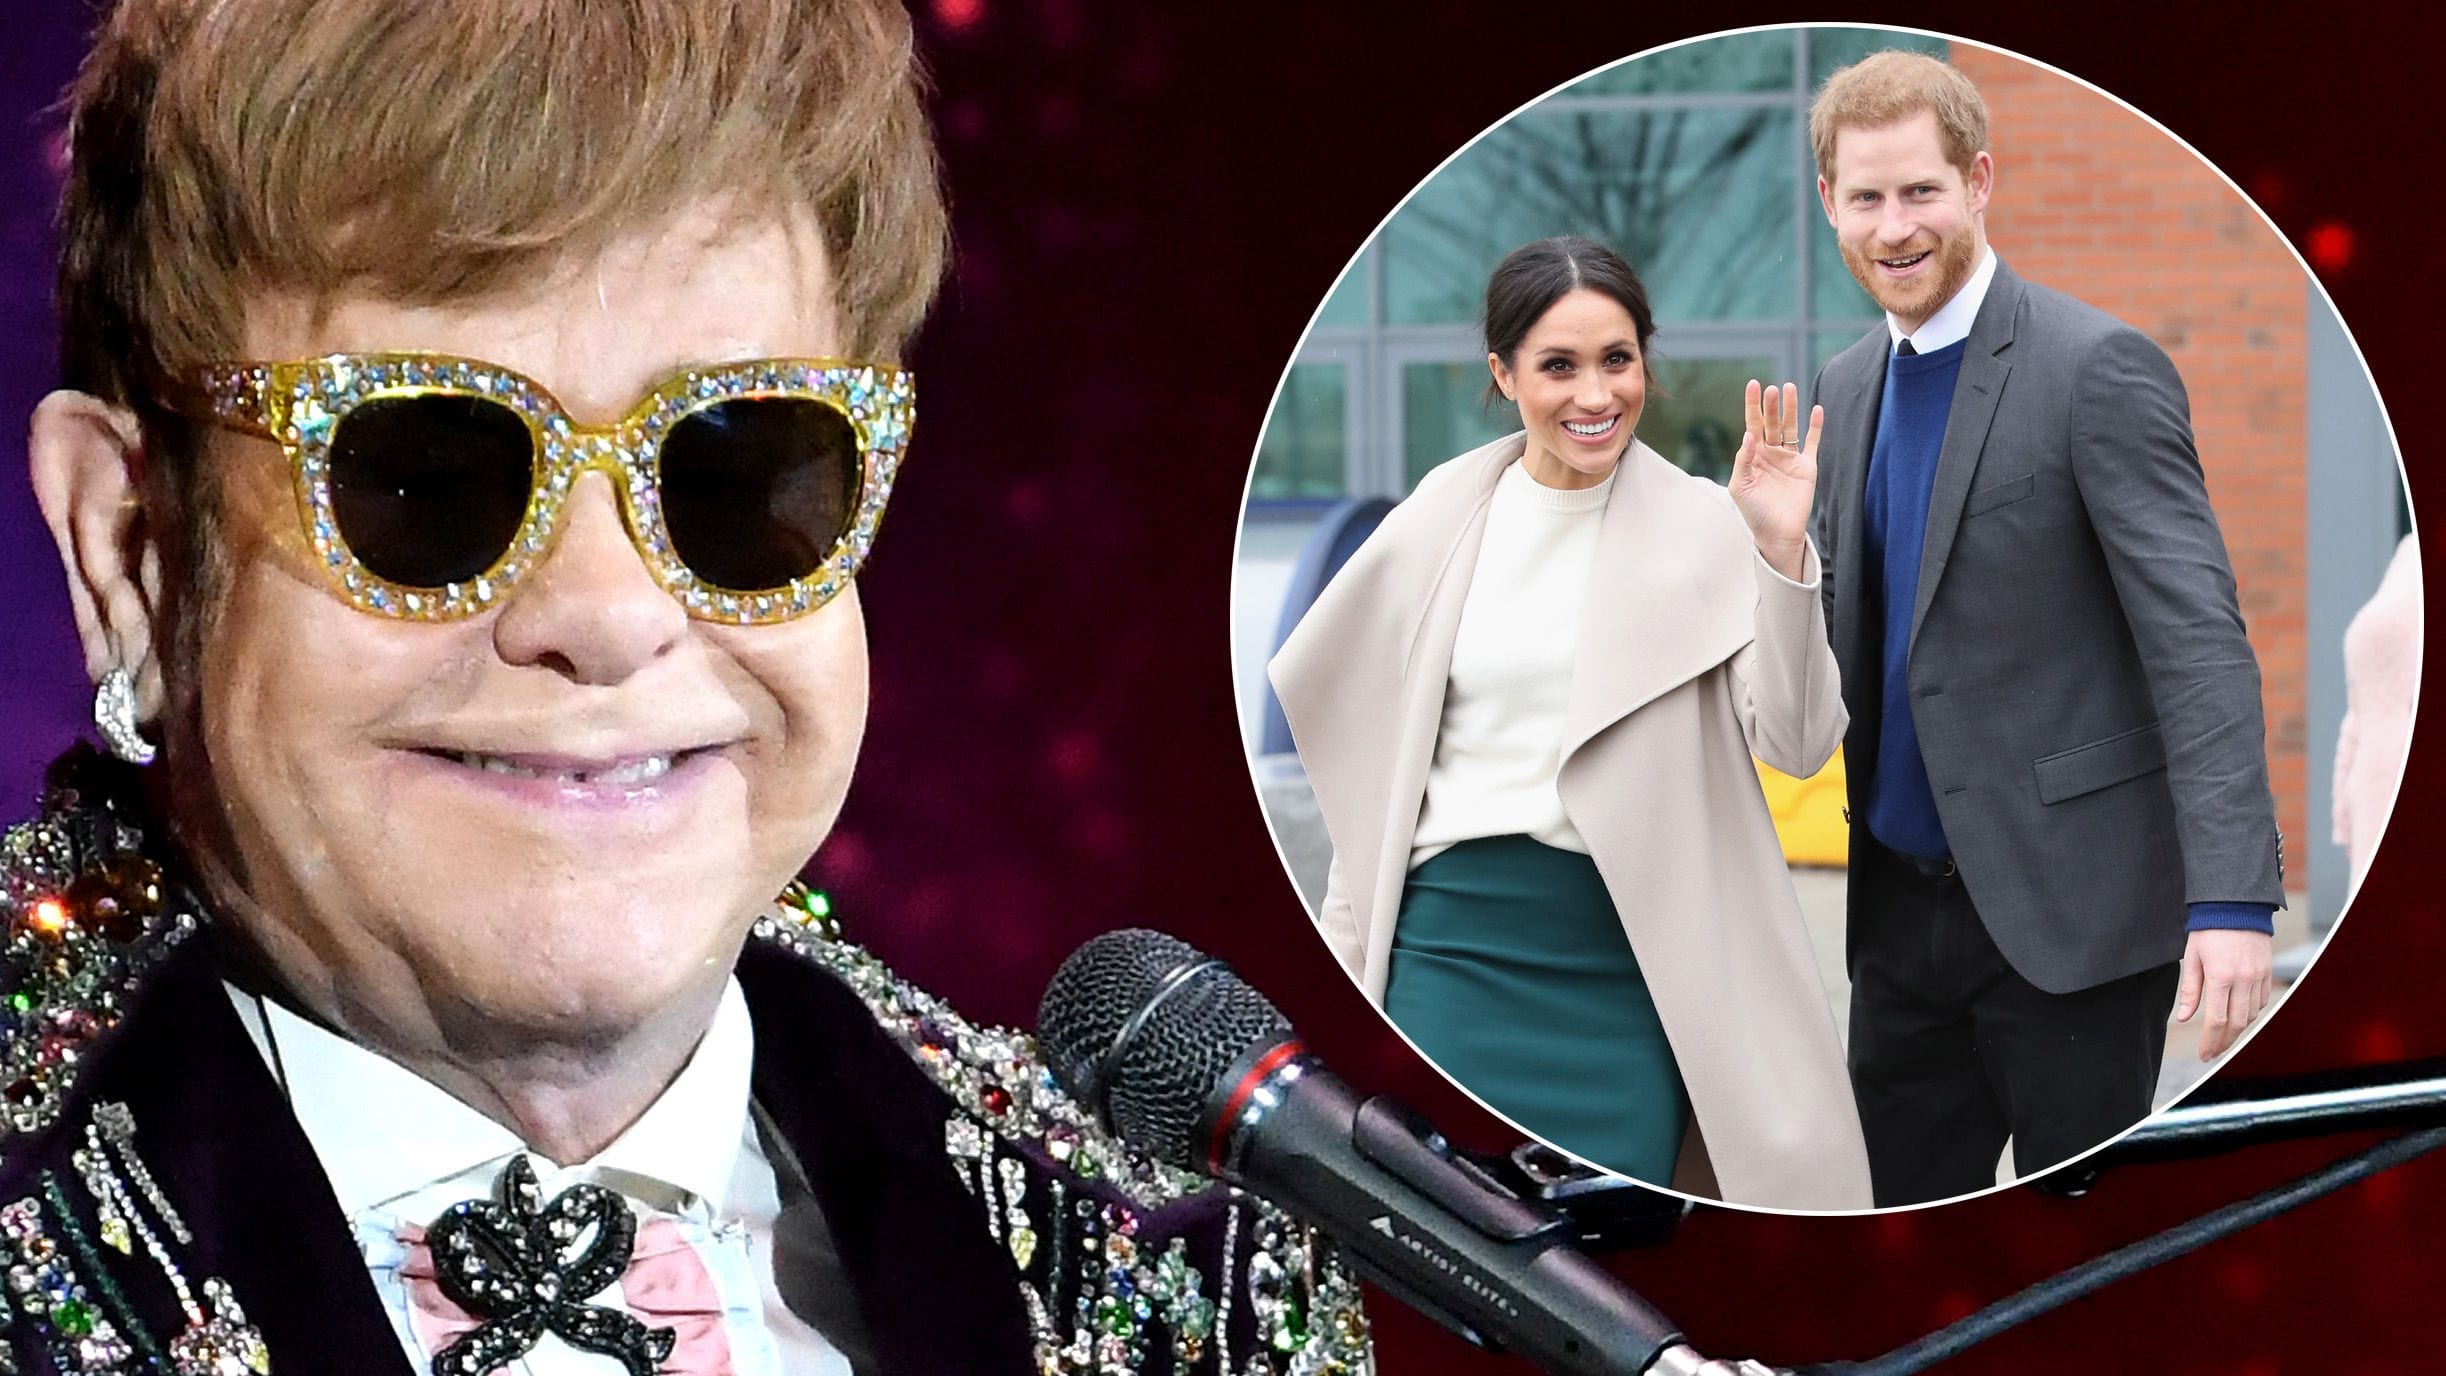 Have Prince Harry and Meghan Markle snubbed Elton John from royal wedding invite list?